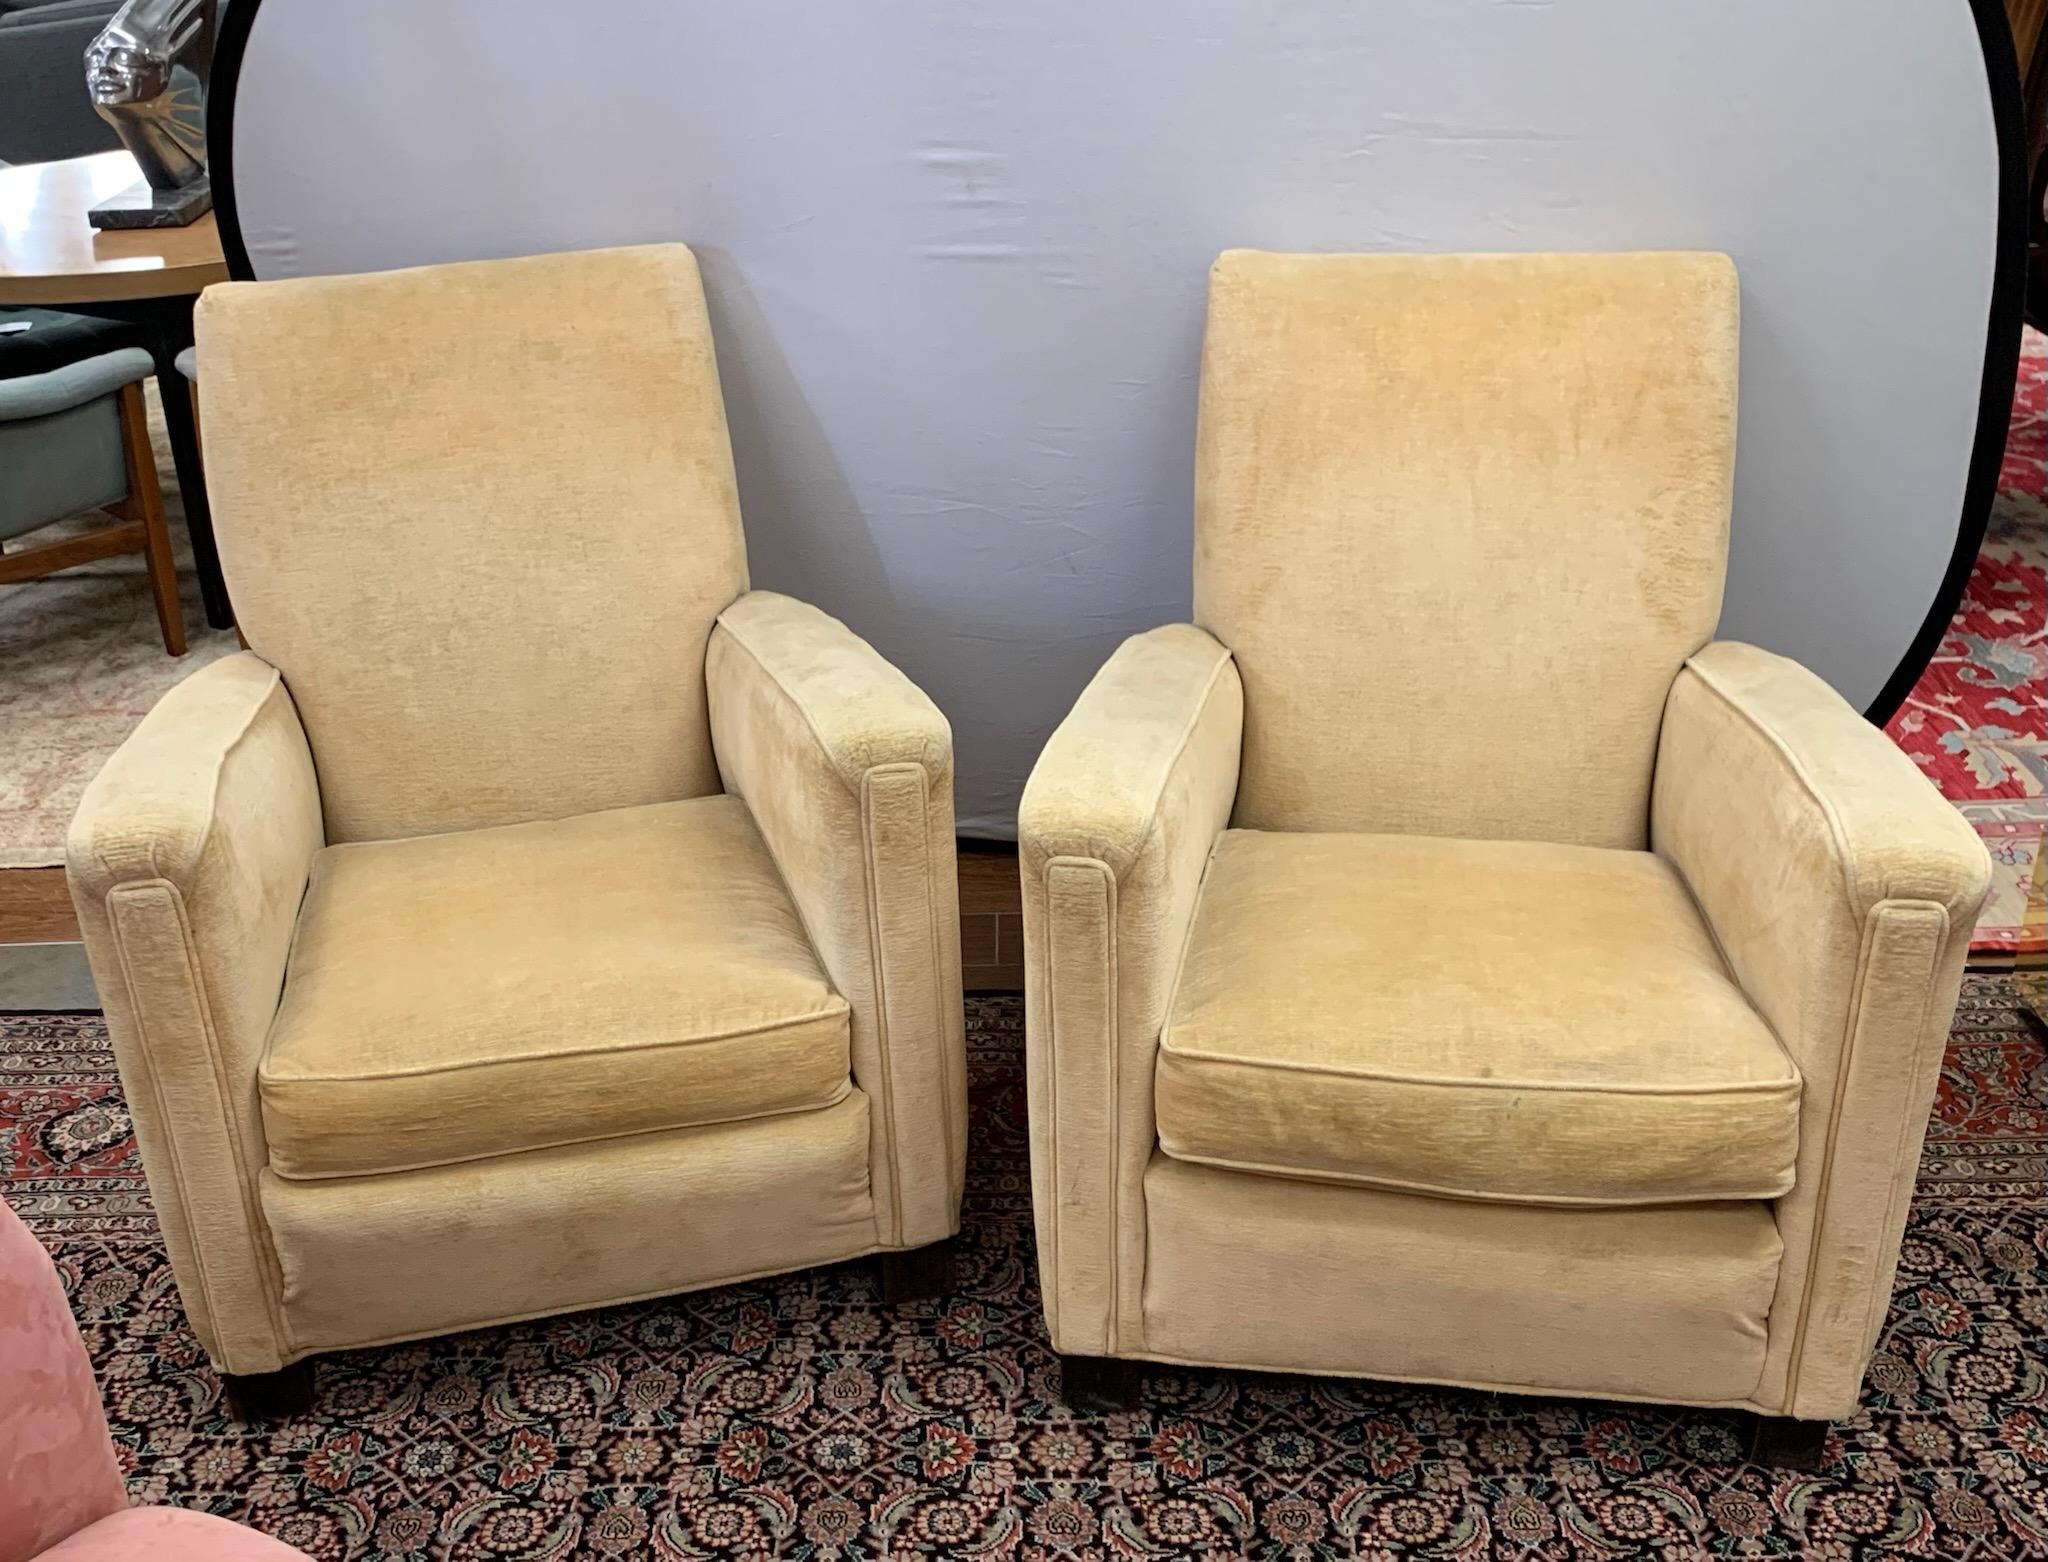 An elegant pair of matching Art Deco style club chairs upholstered in a table ale gold colored velvet fabric that is in decent condition. Exceptional minimalist lines.
Perfect for any living area, office or library. Own the best.